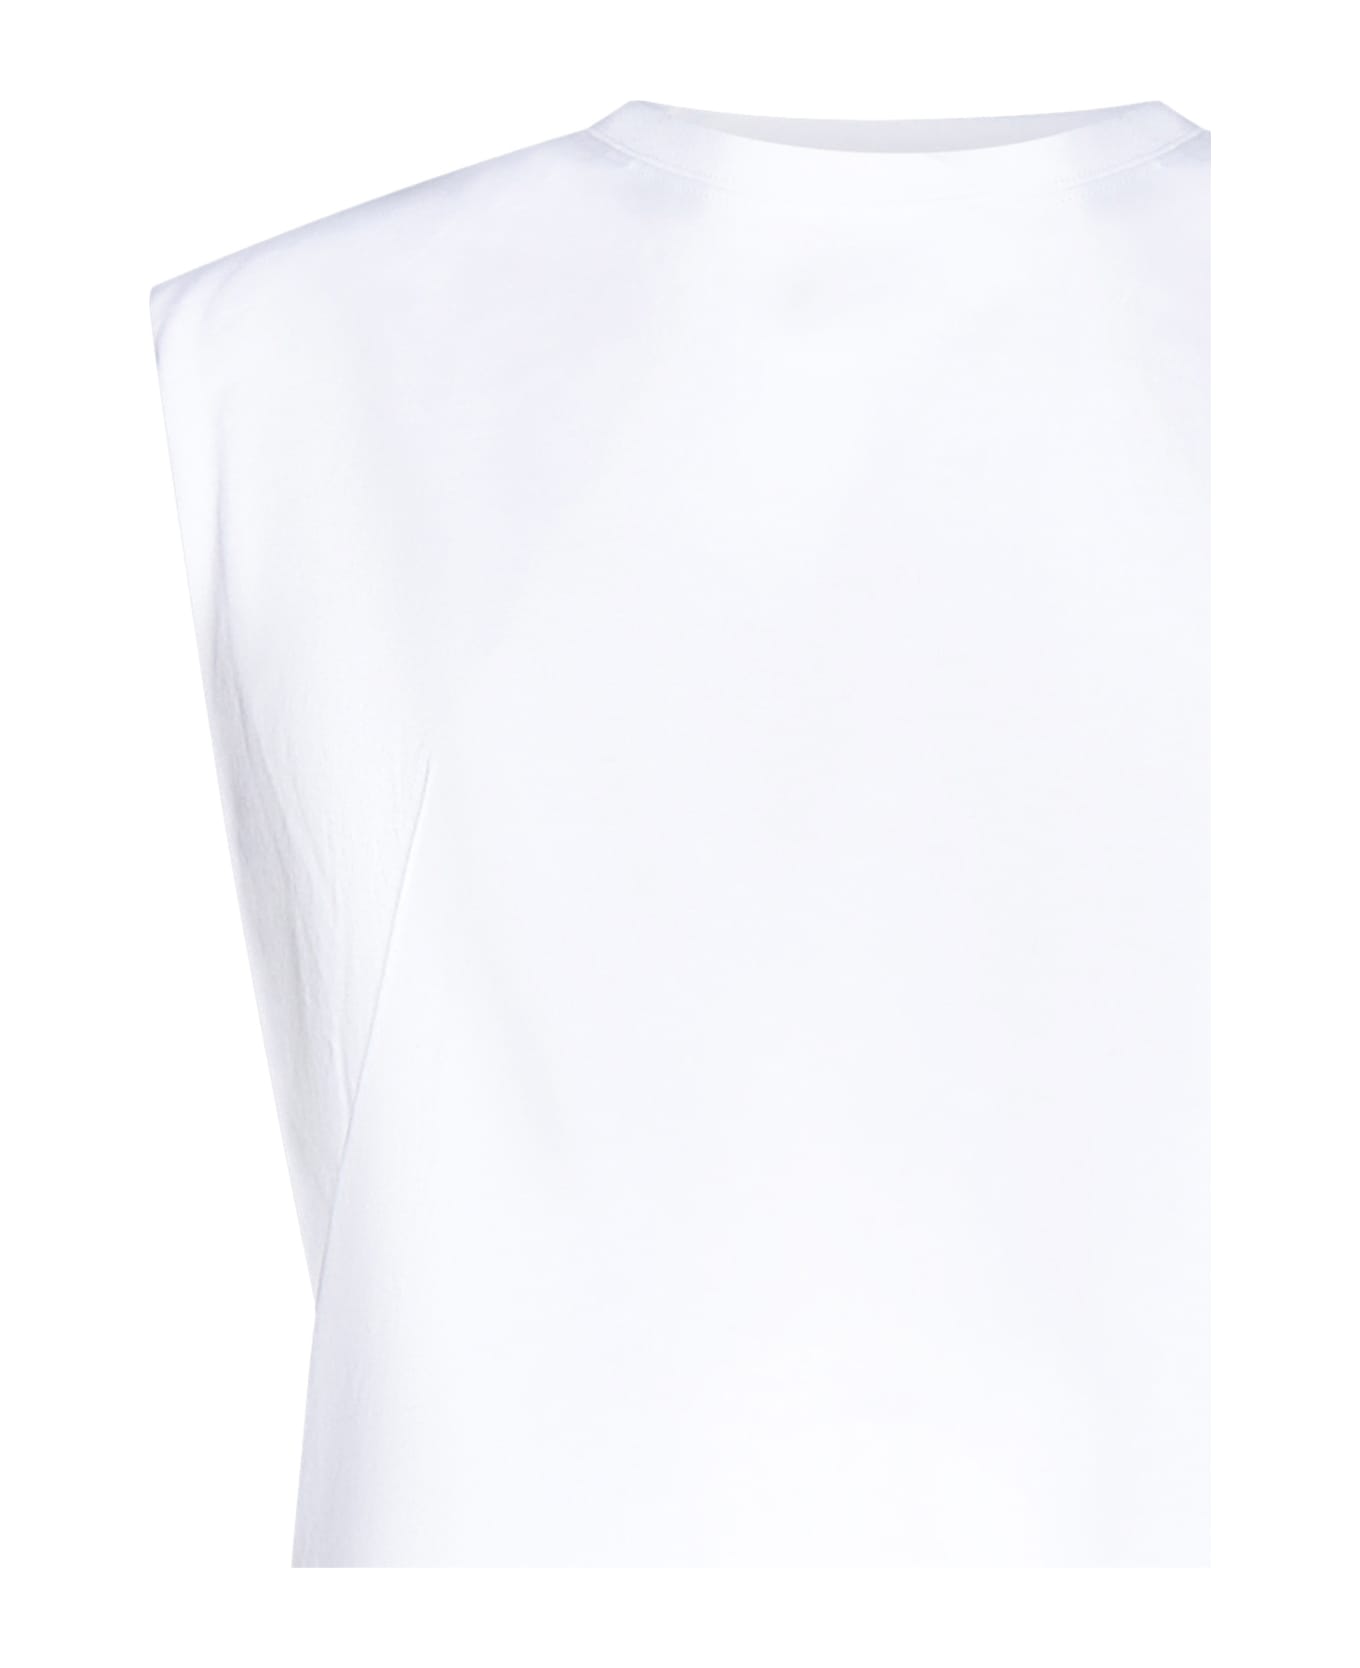 Versace Jeans Couture T-shirt - White